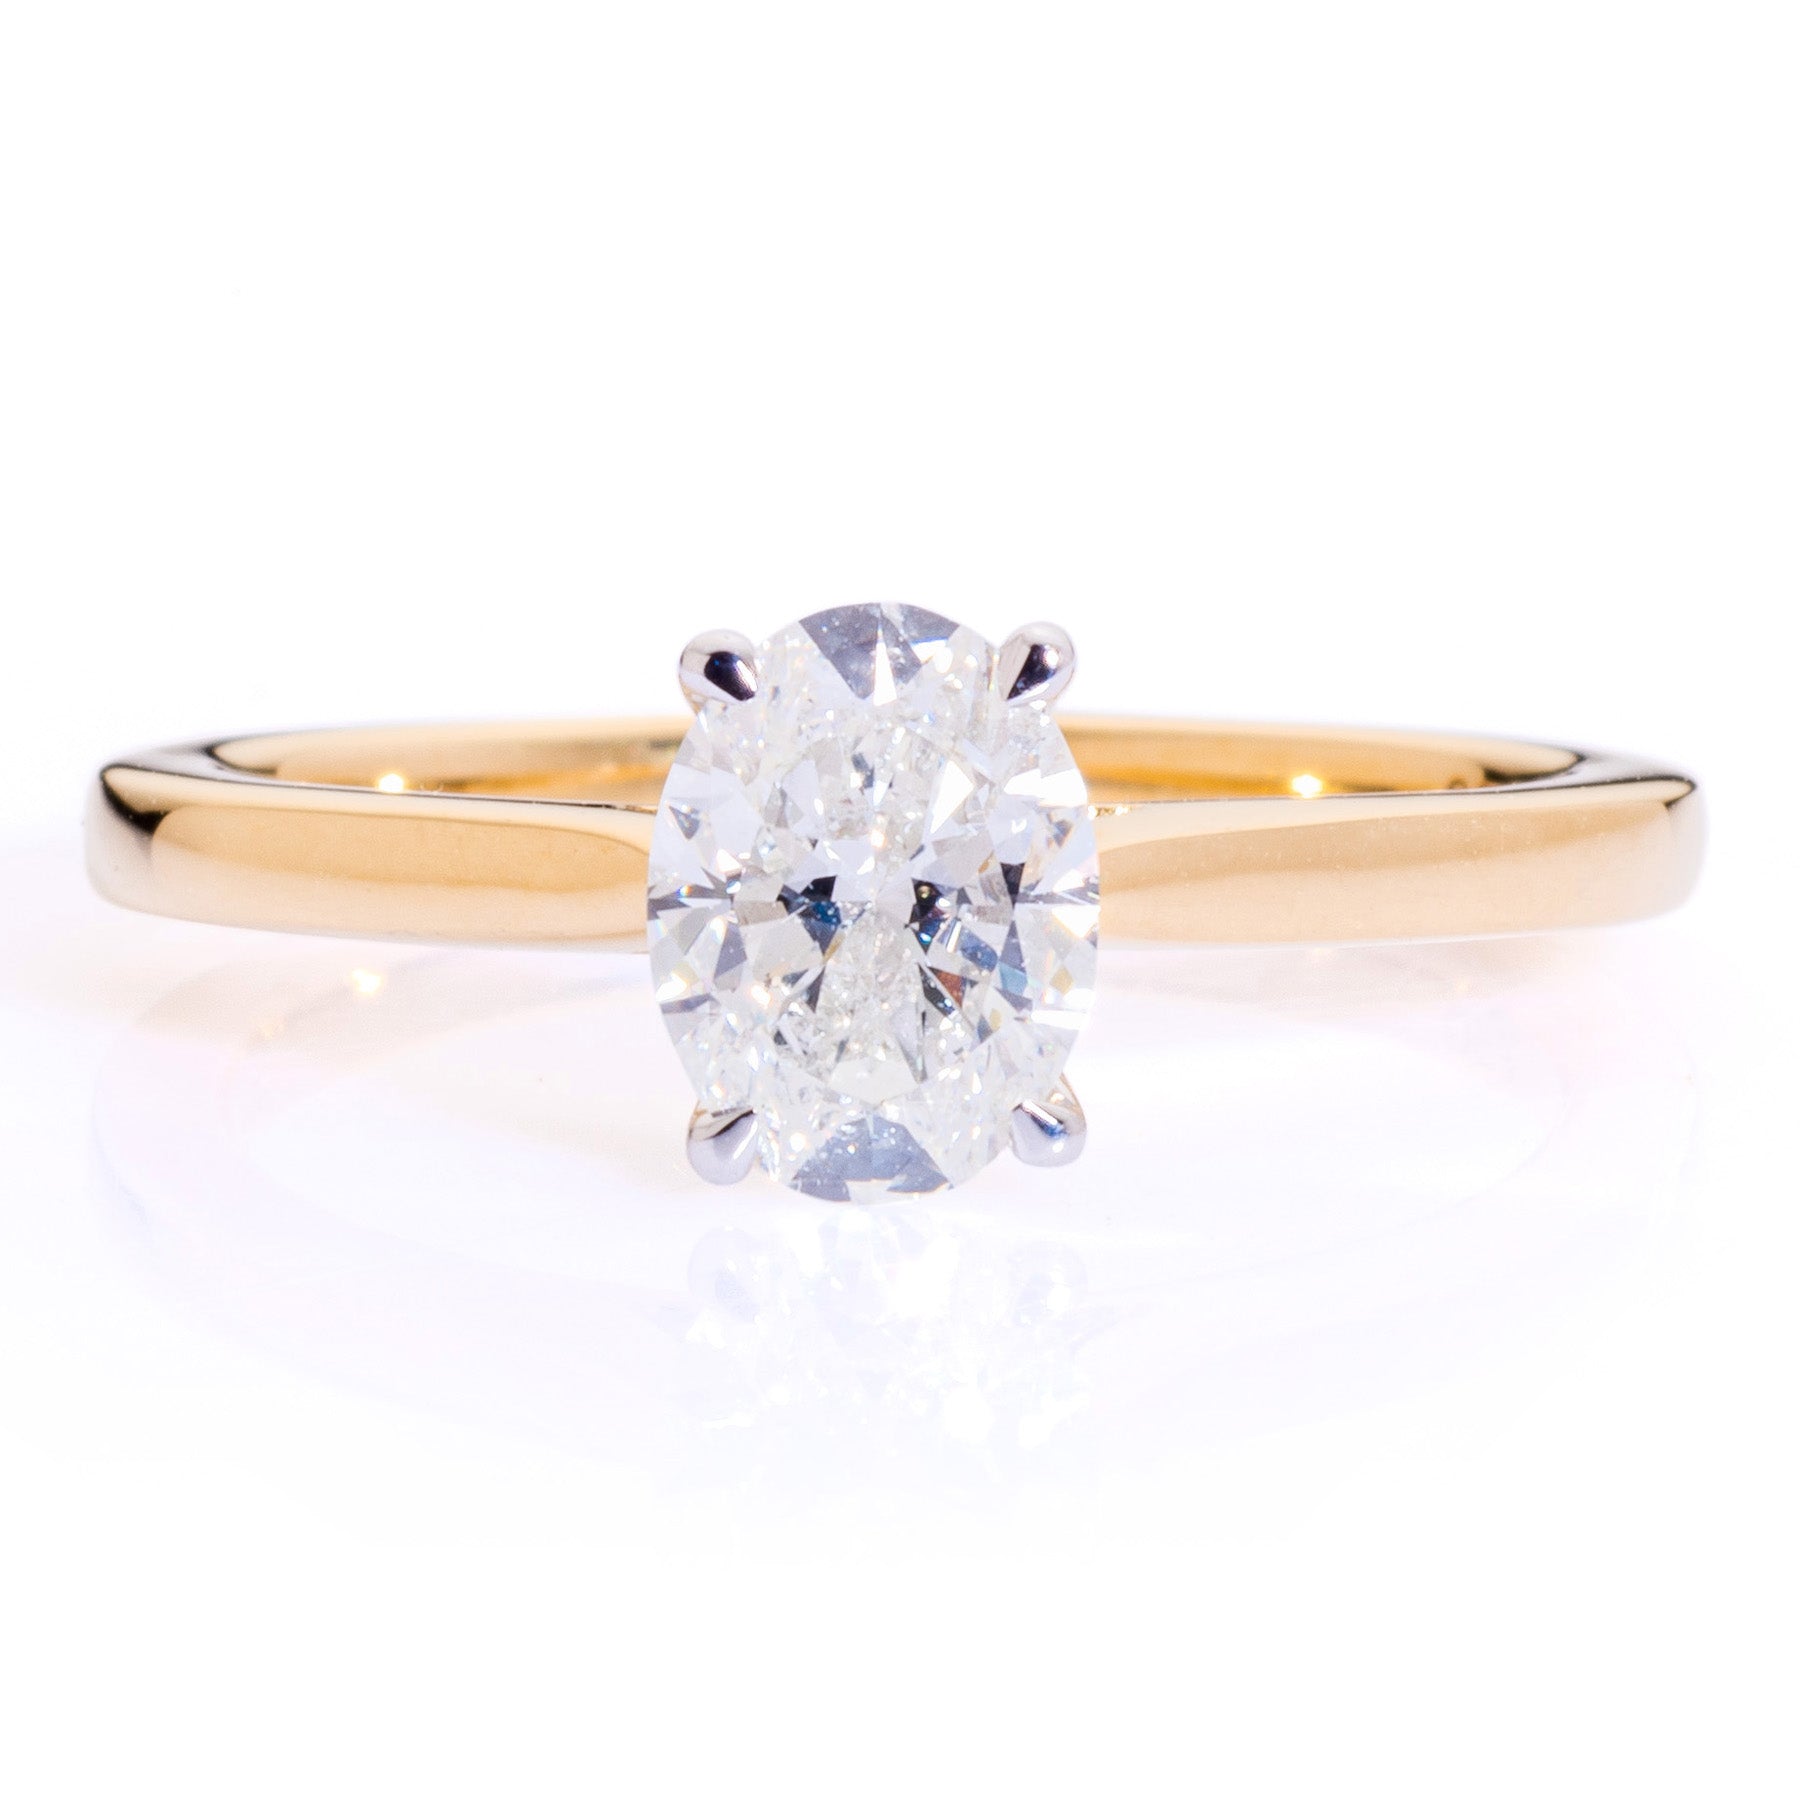 Oval diamond solitaire platinum claw yellow gold tapered band Harrogate jewellers Fogal and barnes 